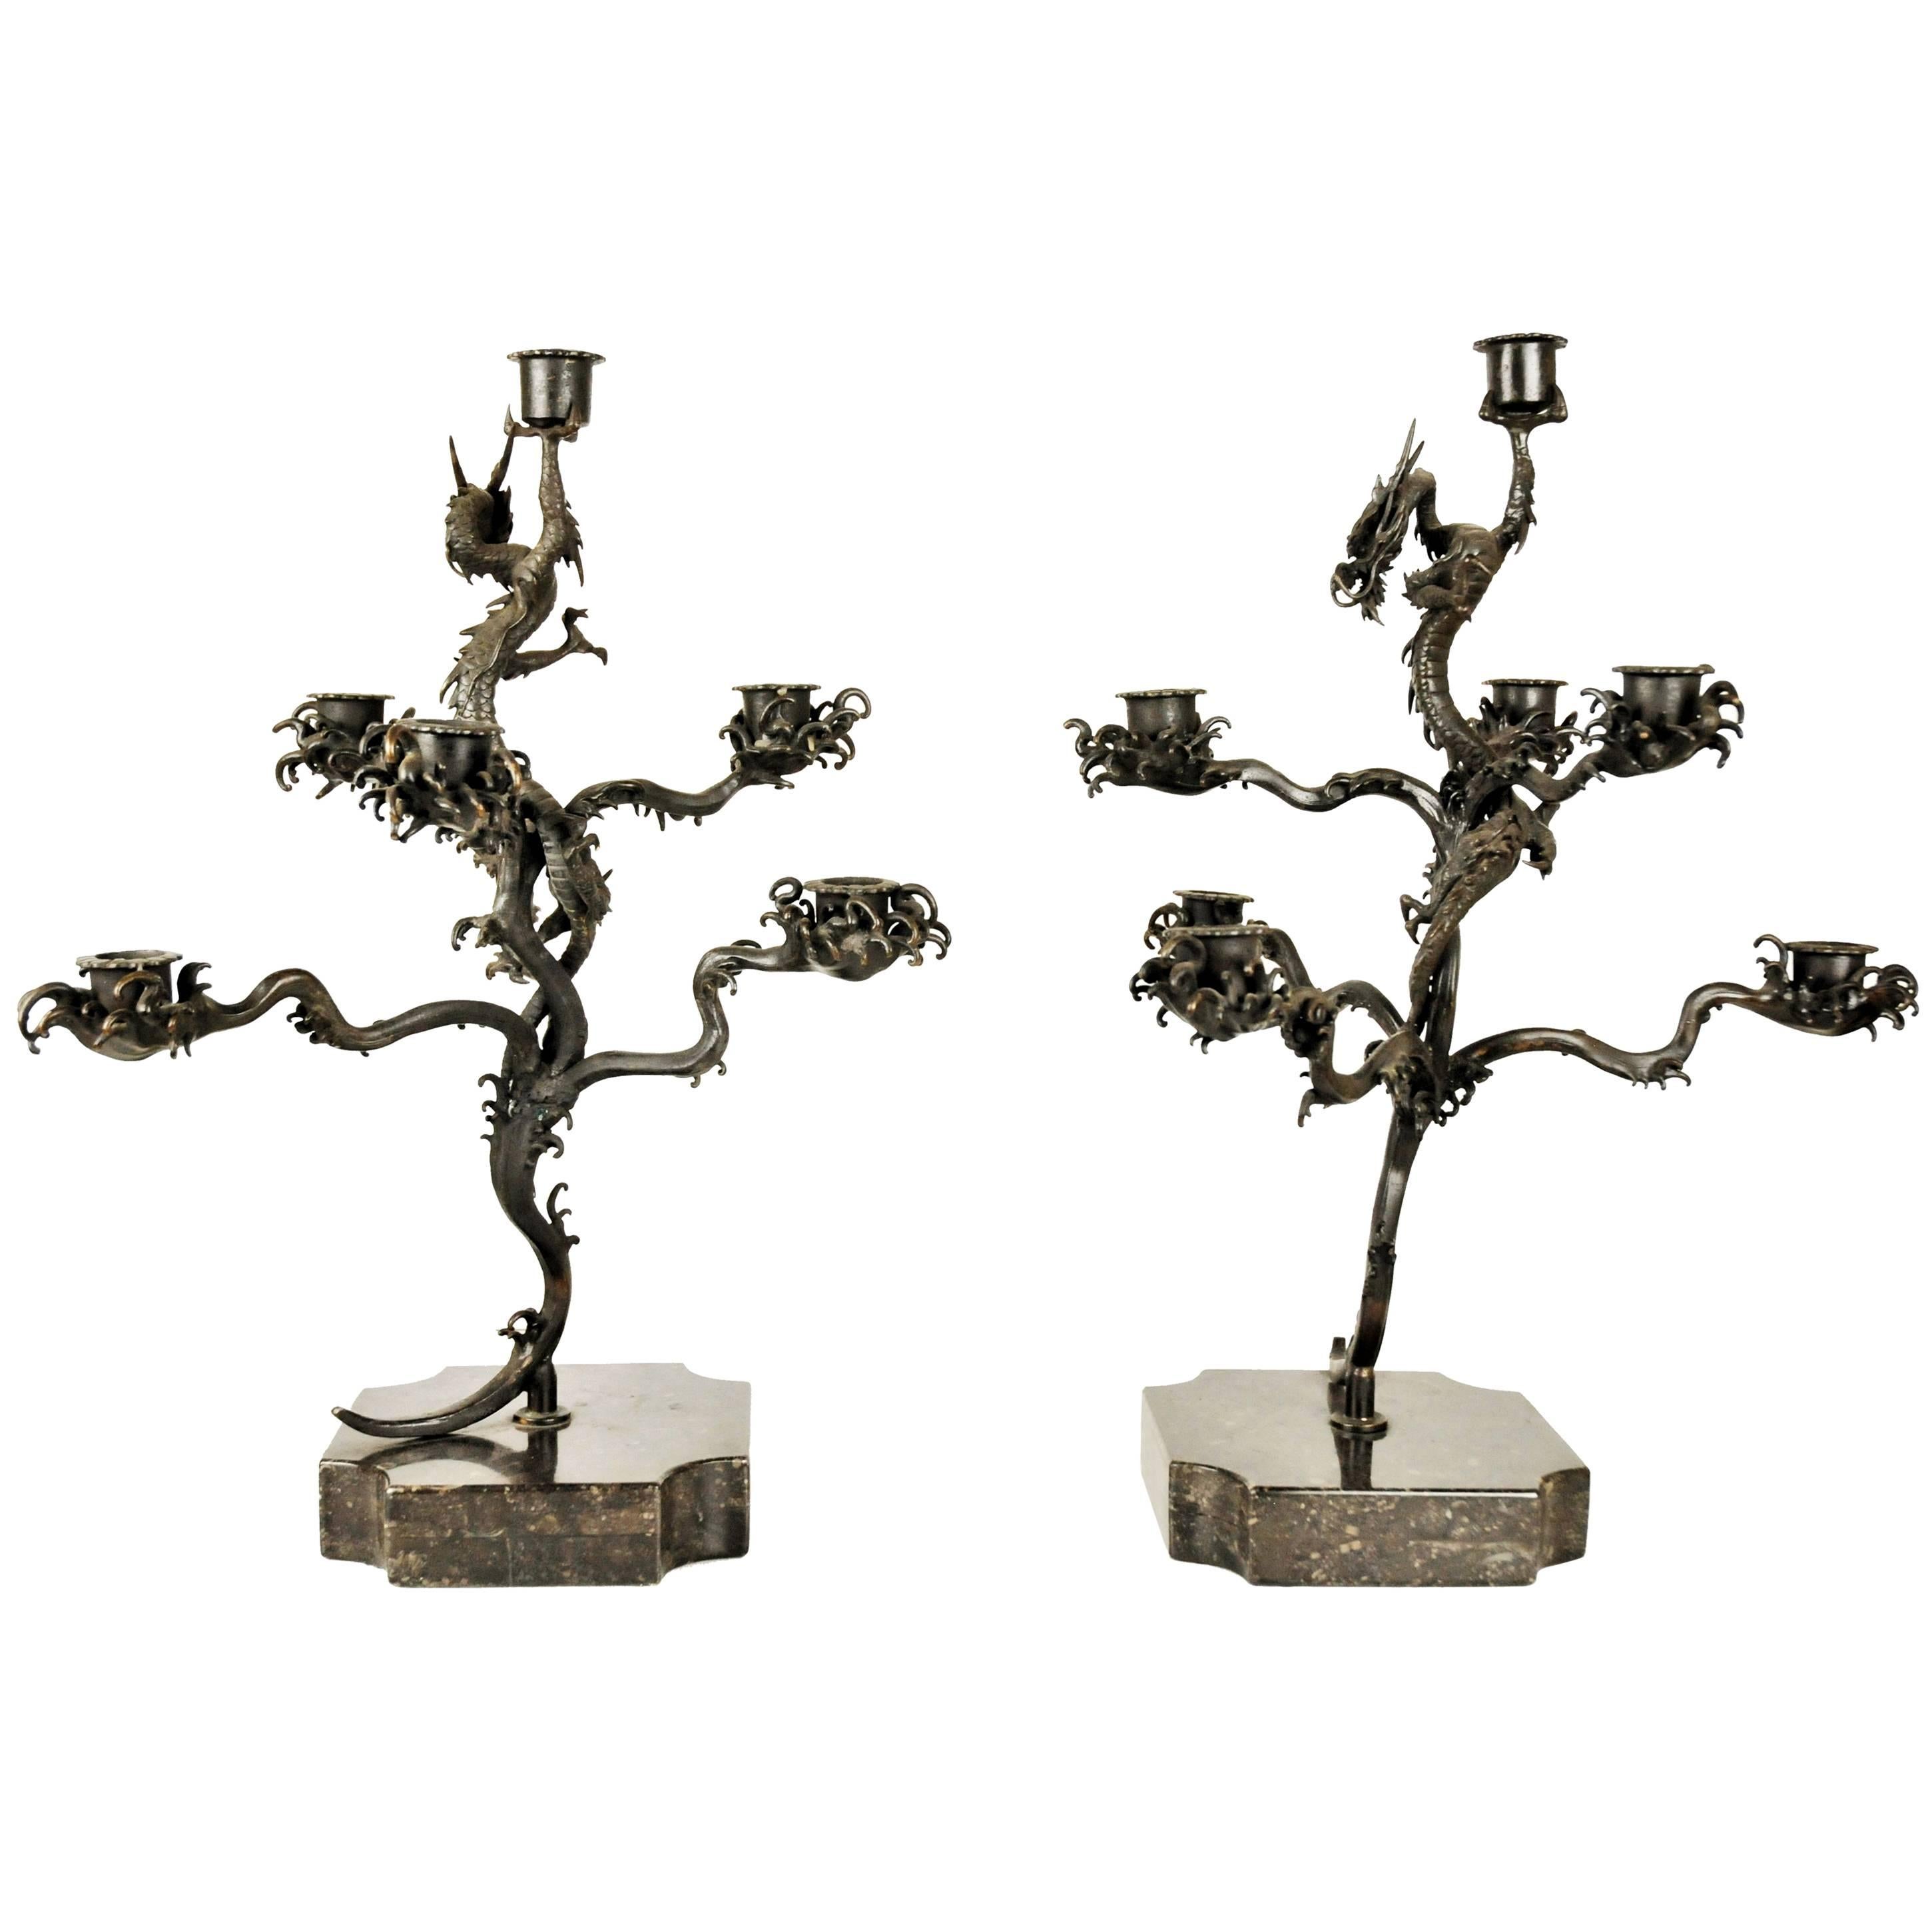 Pair of Japanese Patinated Bronze Candelabras, Meiji Period, ca. 1900 For Sale